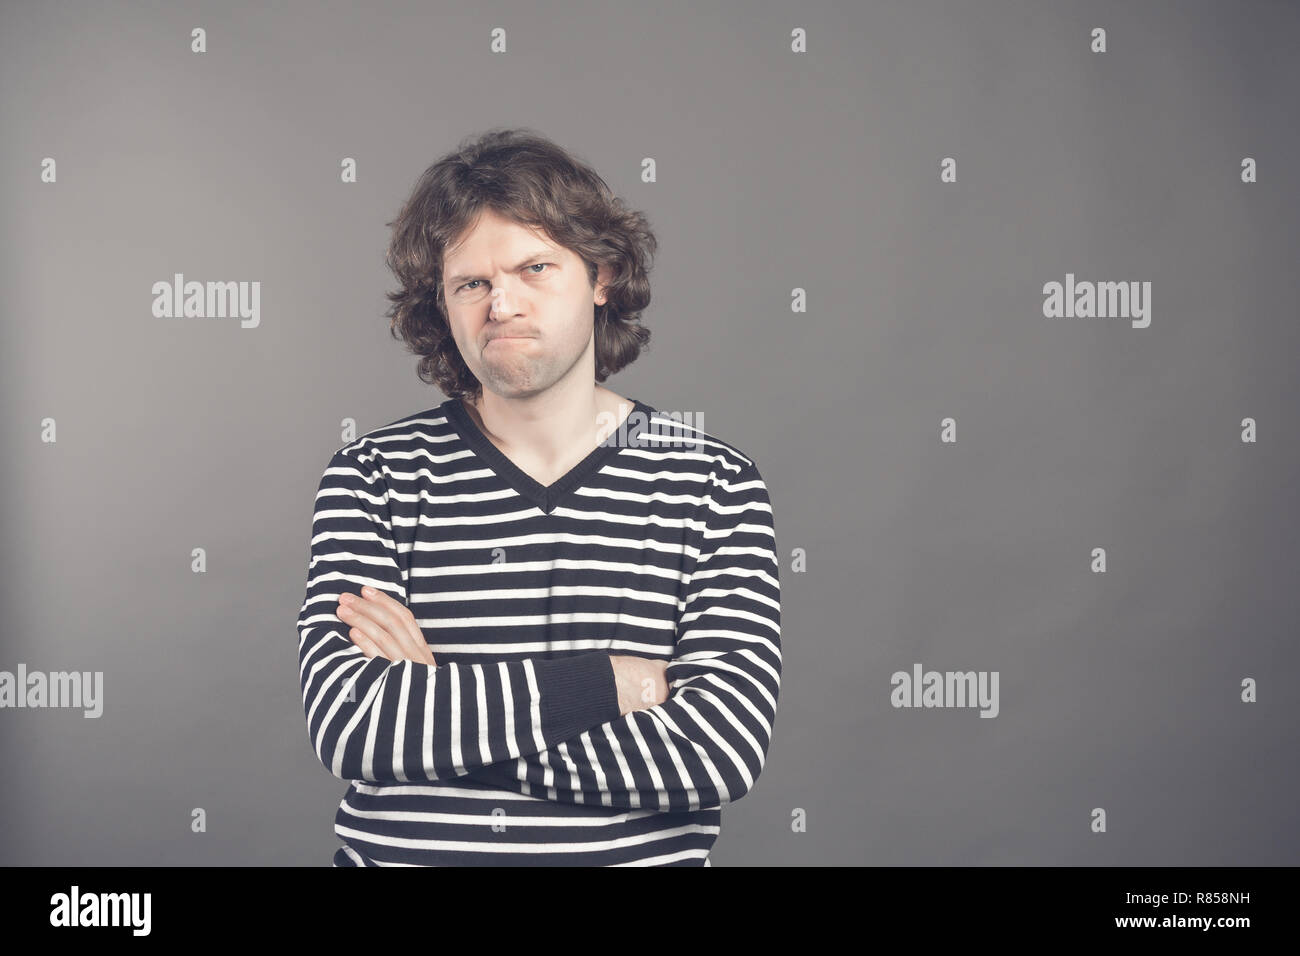 Closeup portrait of displeased, angry, grumpy man in striped sweater bad attitude, arms crossed, folded, looking at you, isolated gray background. Neg Stock Photo